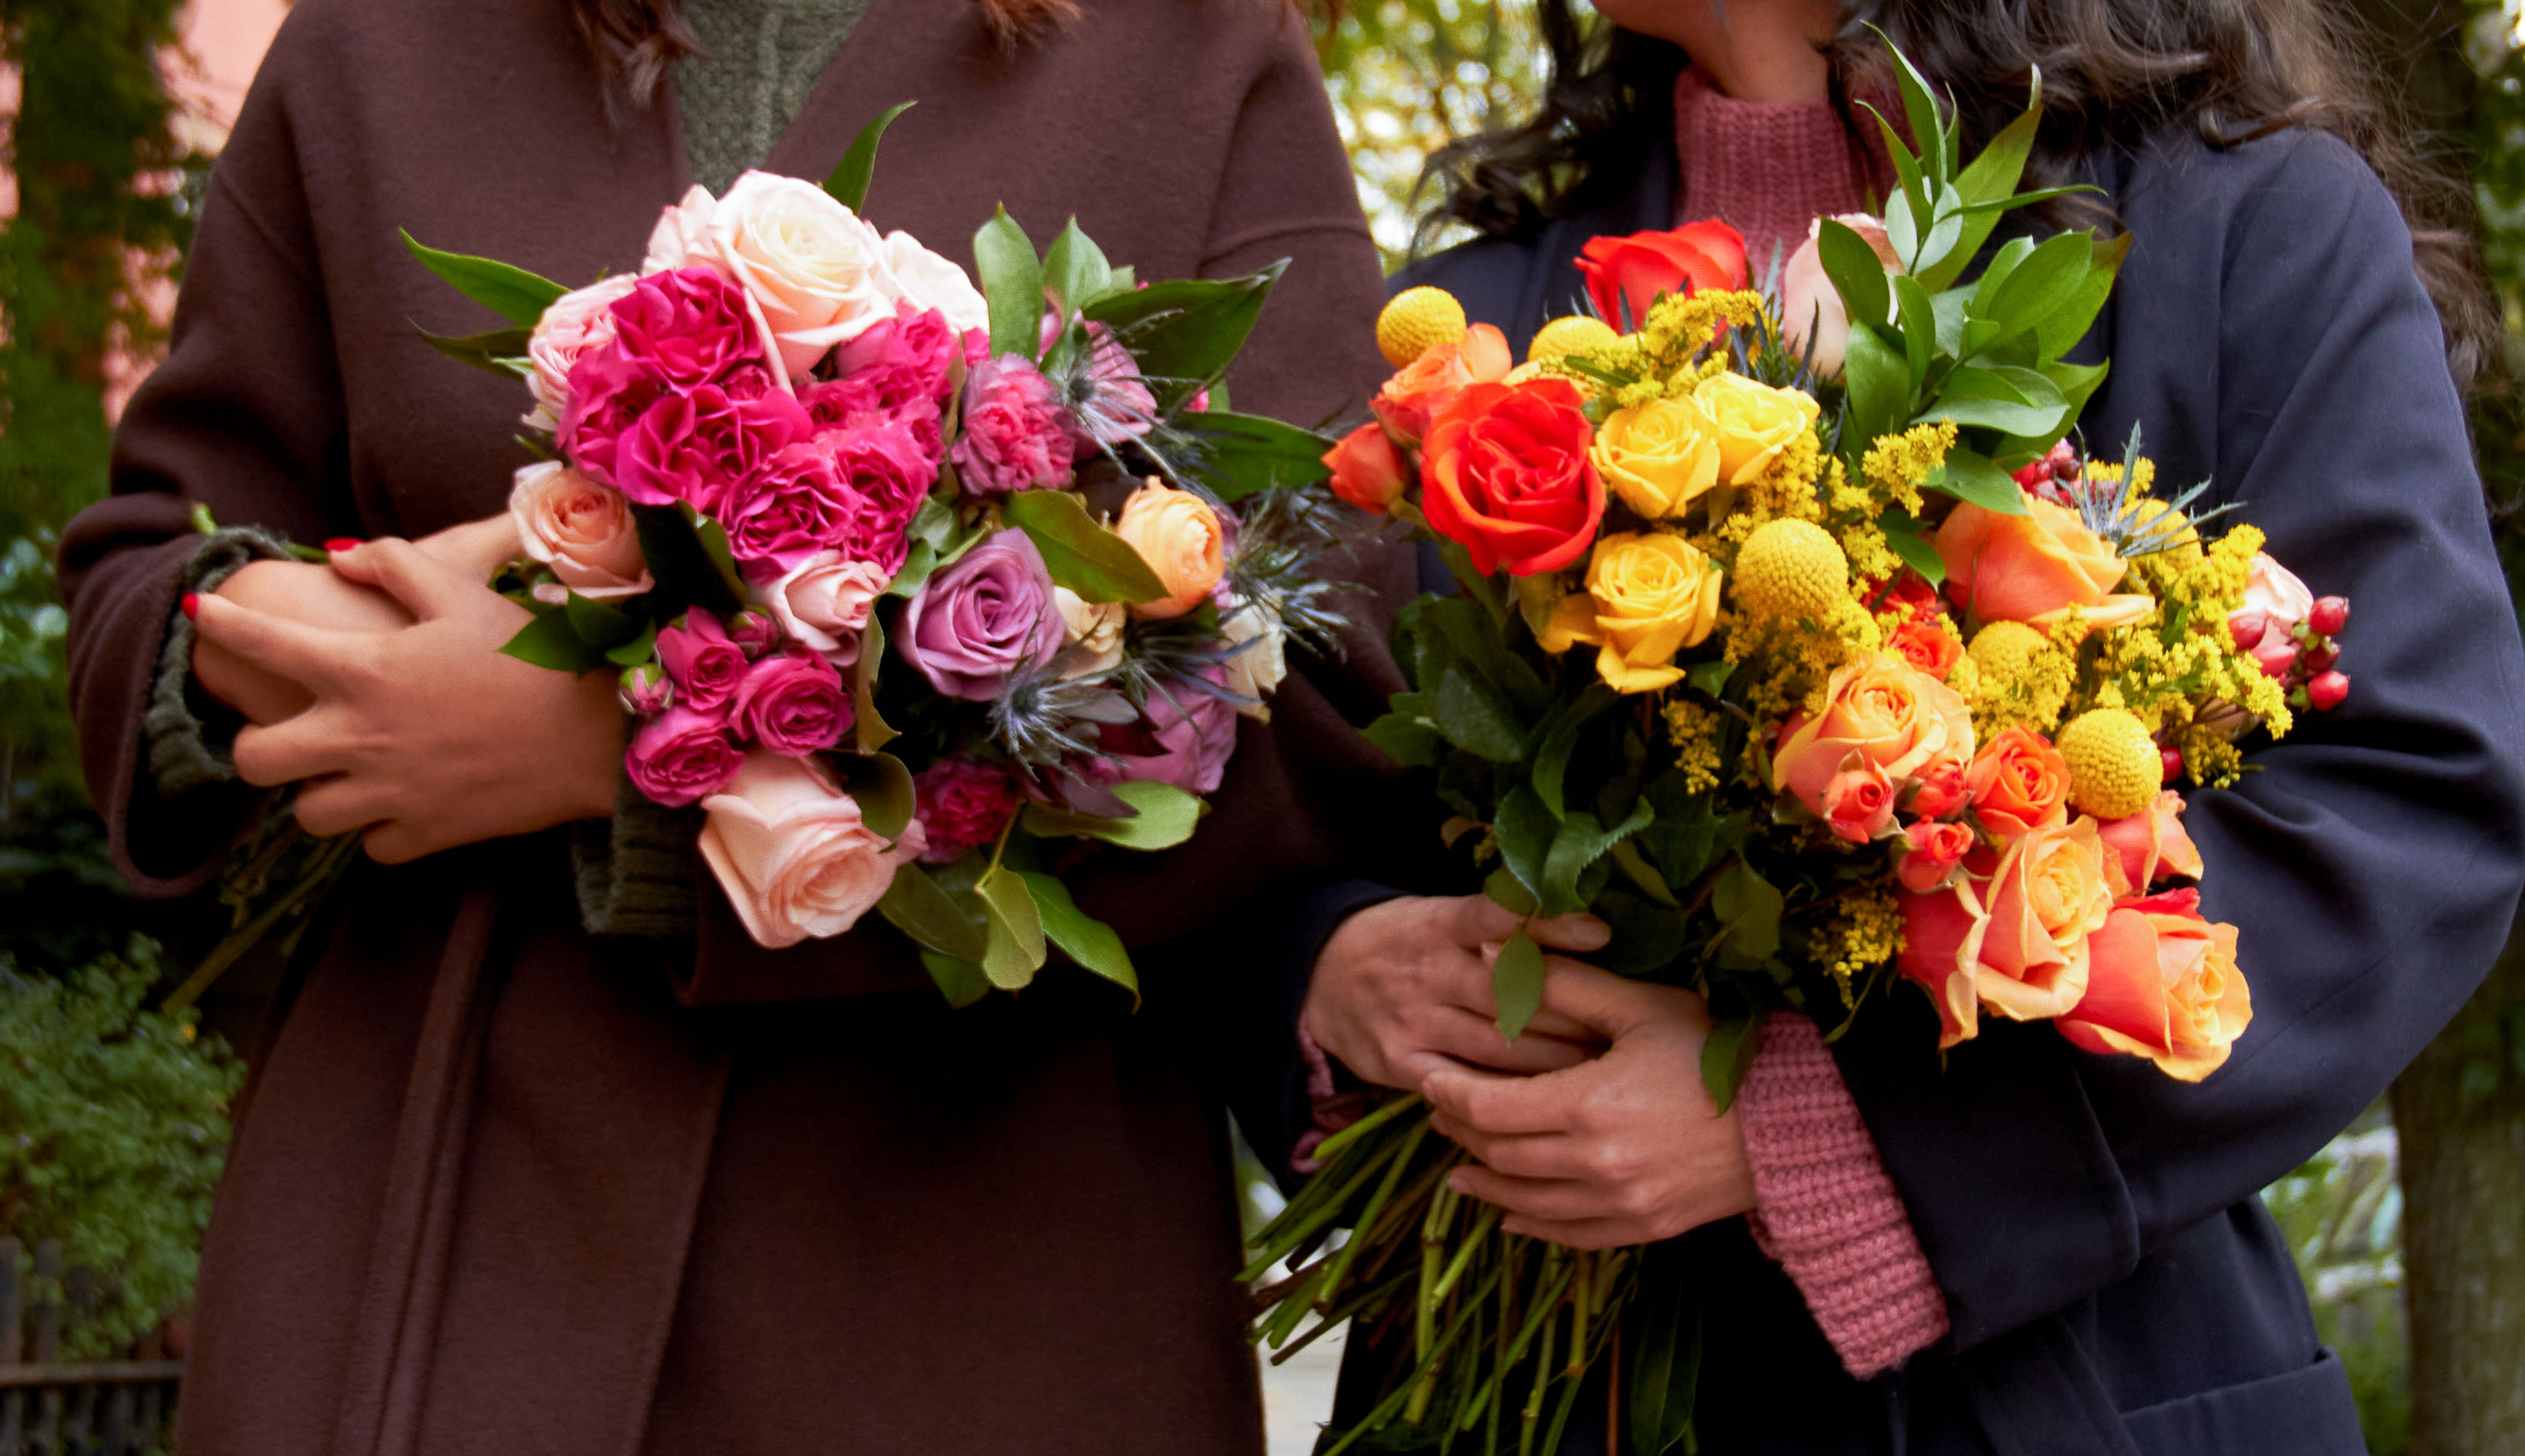 Women celebrating International Women's Day 2023 with bouquets of flowers